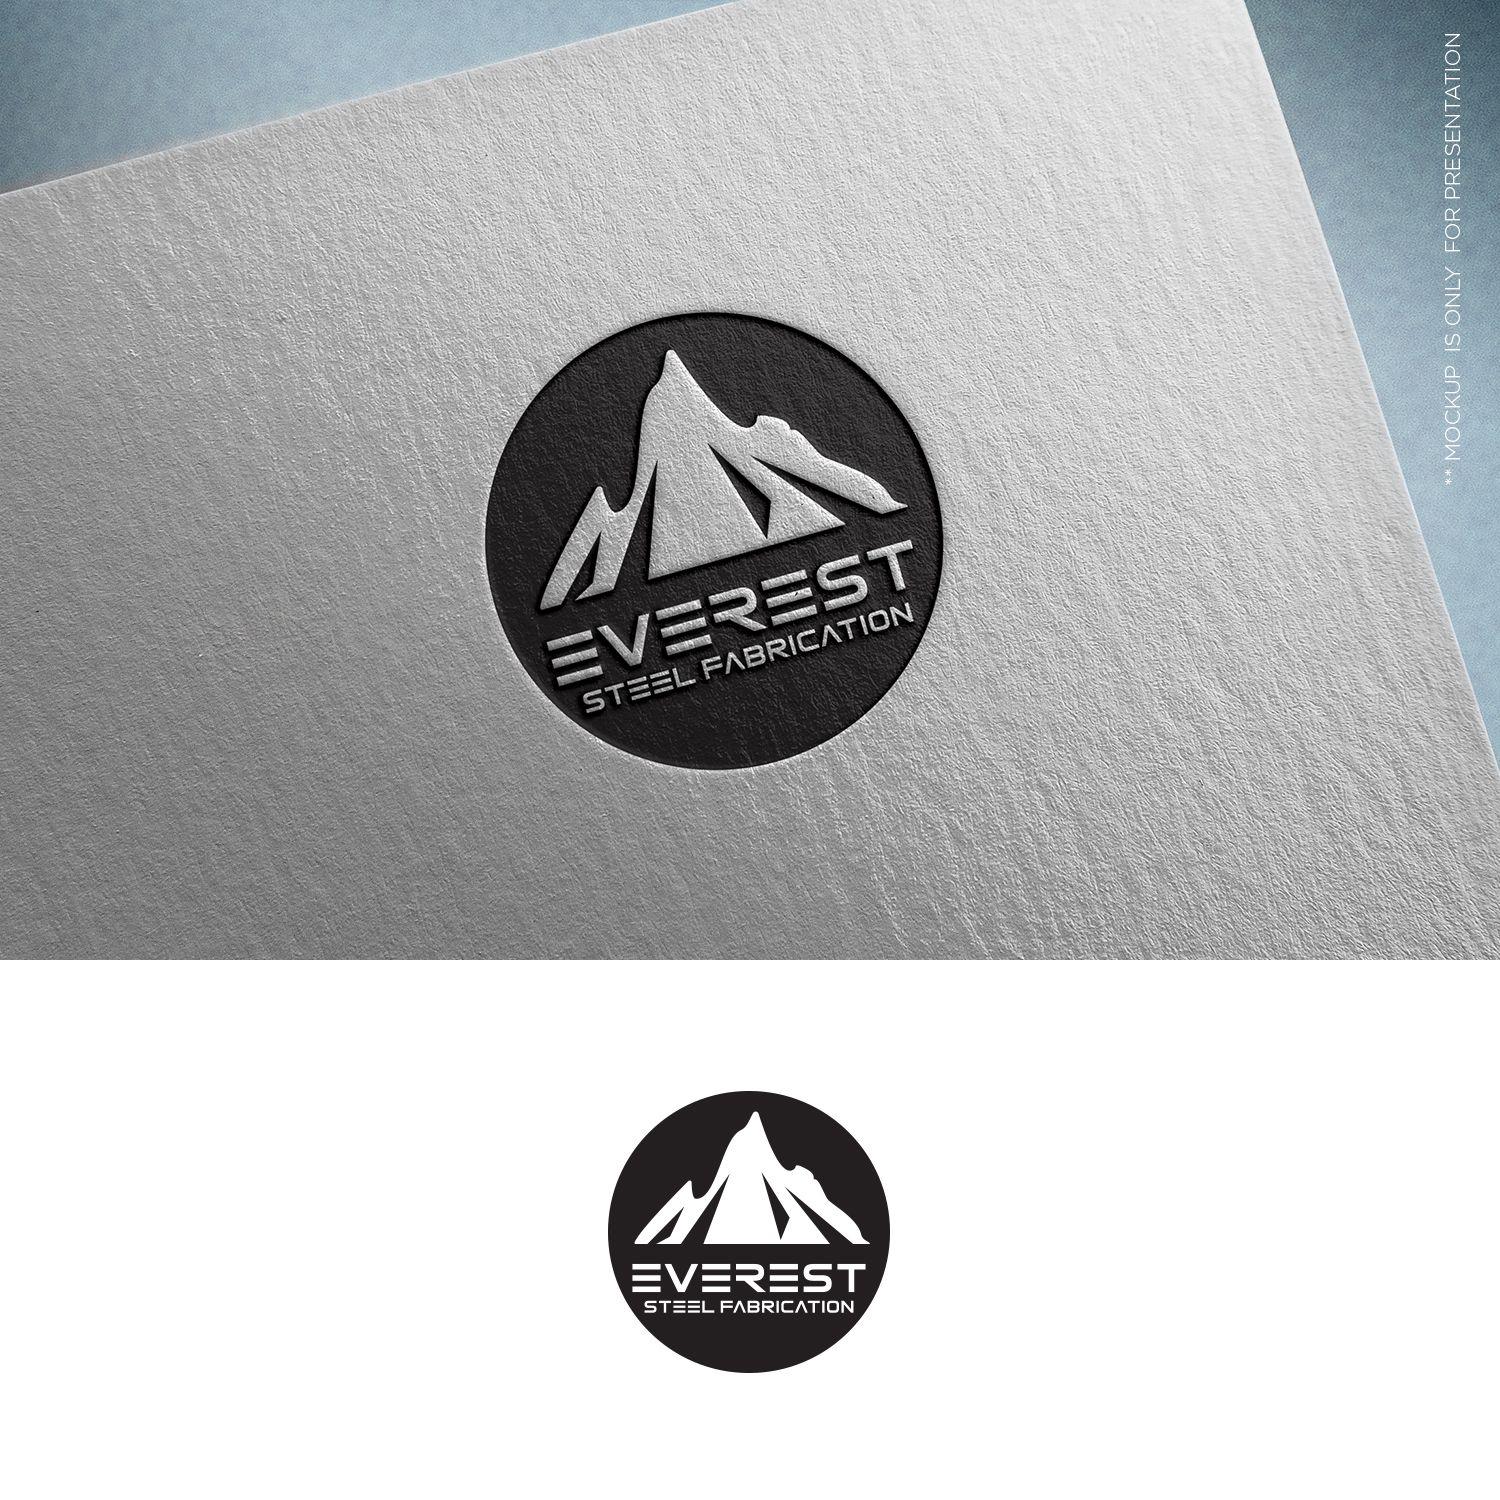 Everest Logo - Conservative, Serious Logo Design for Everest Steel Fabrication by ...